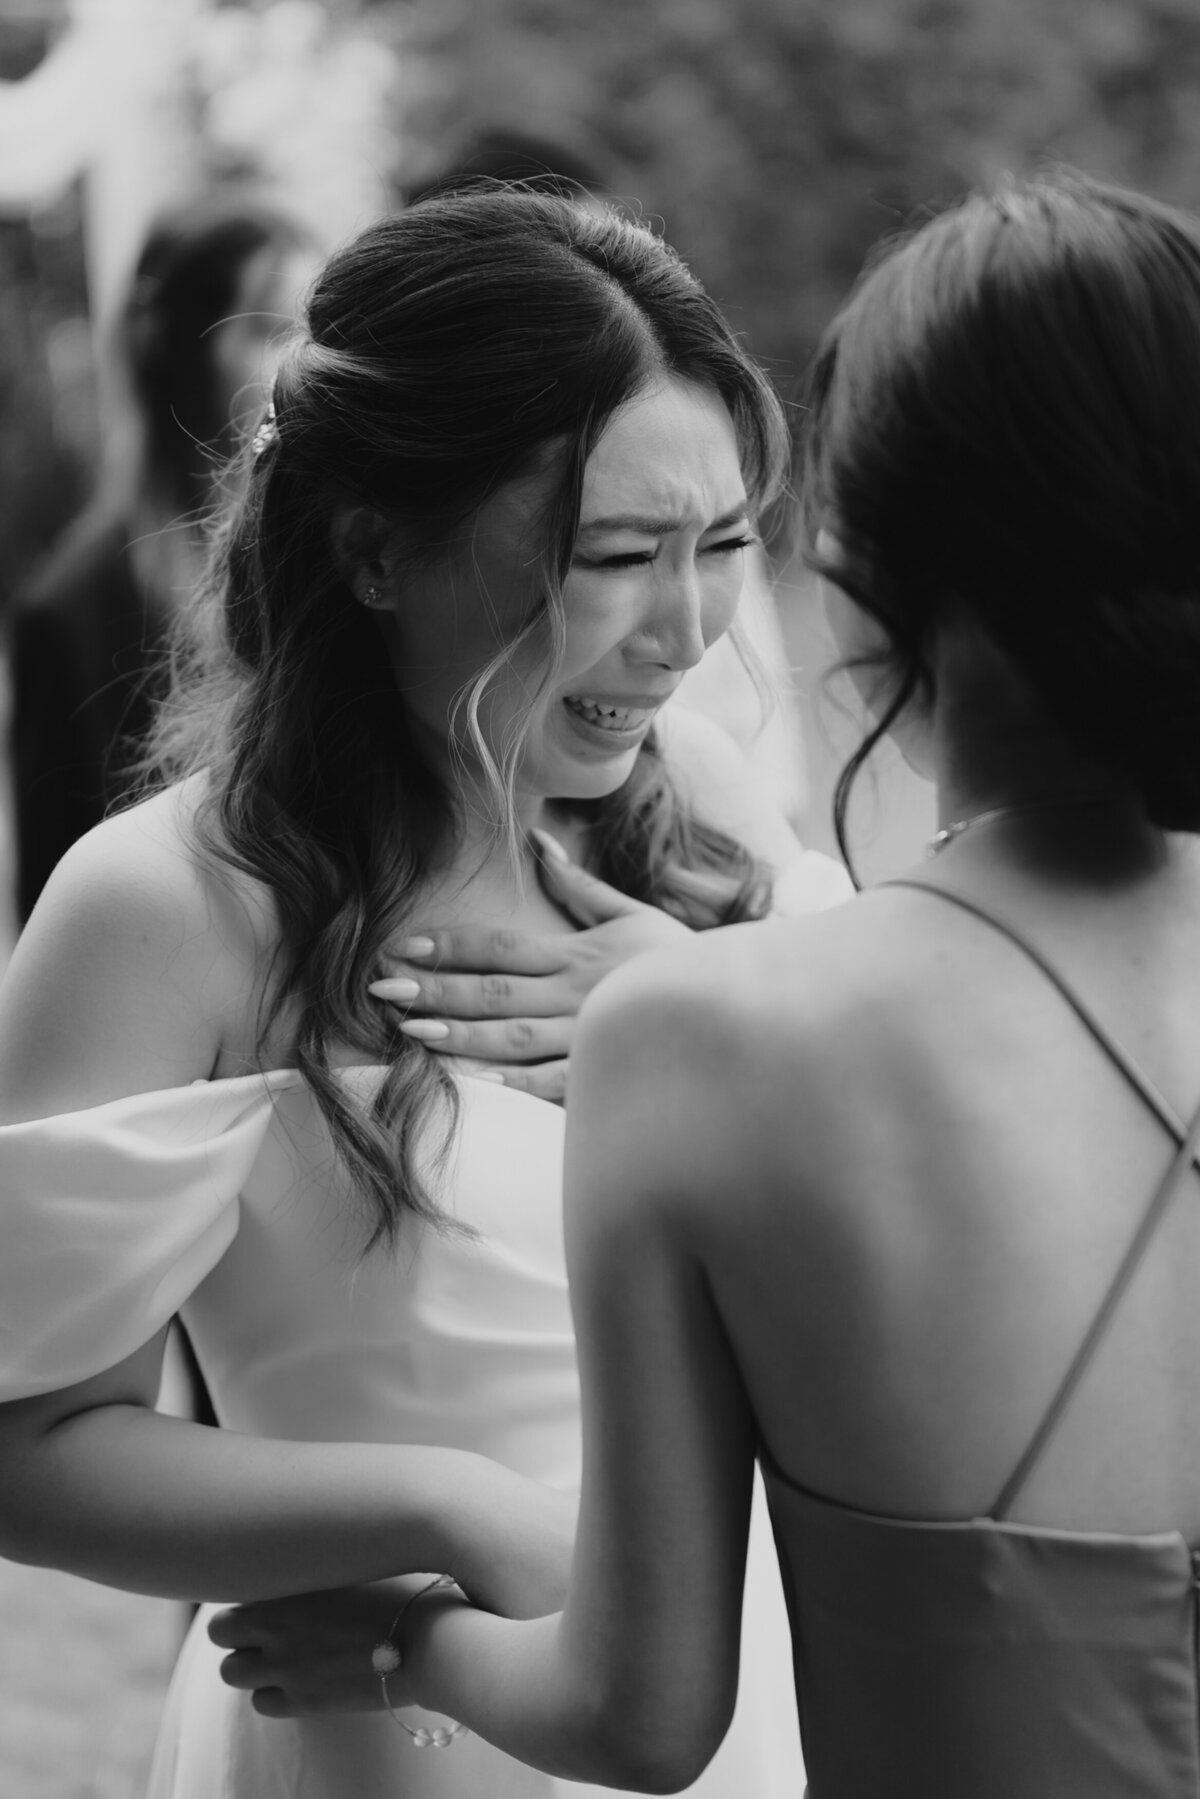 the bride teary eyes while talking to her friend